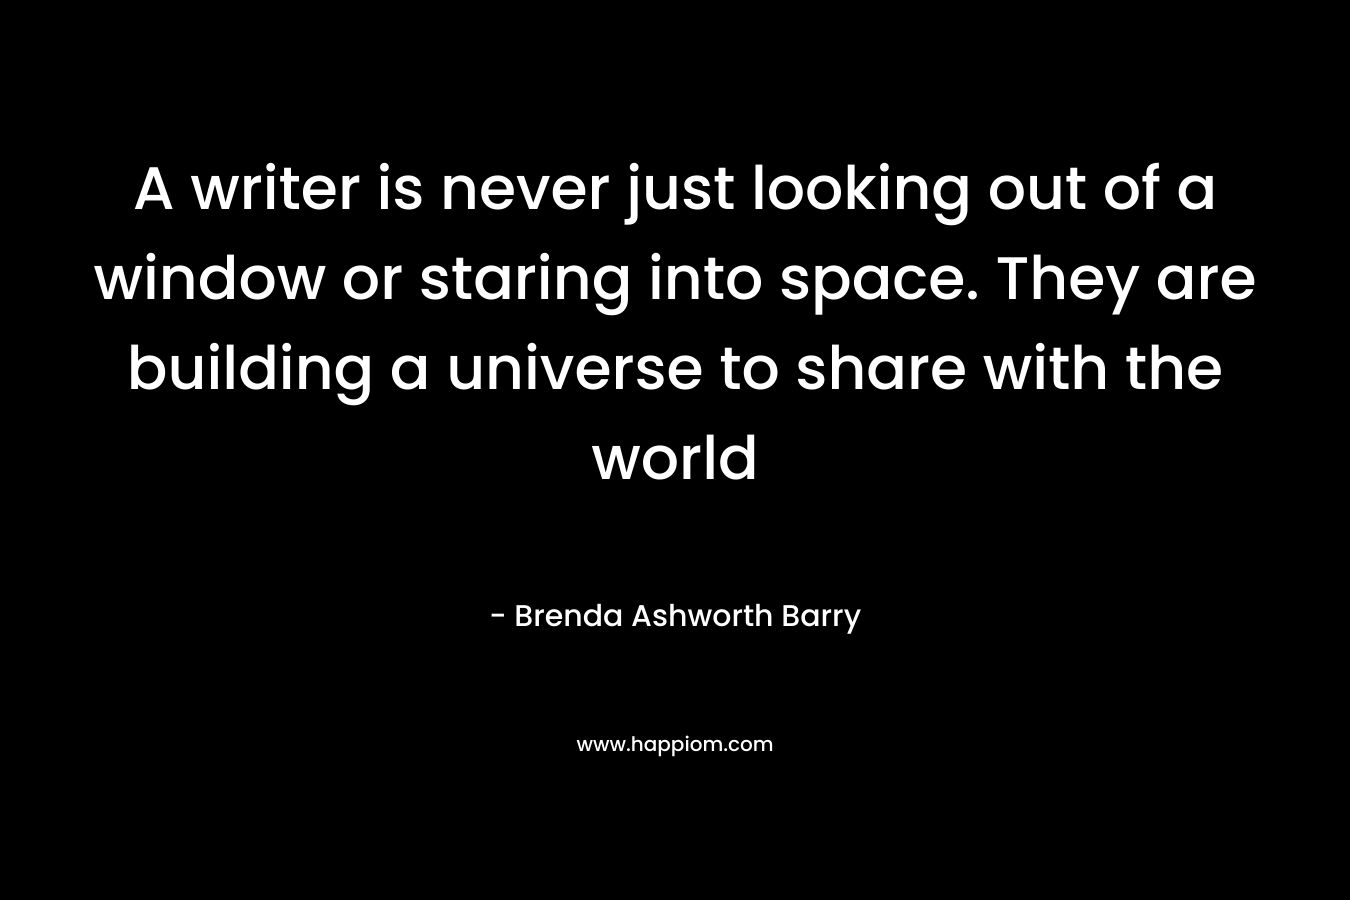 A writer is never just looking out of a window or staring into space. They are building a universe to share with the world – Brenda Ashworth Barry